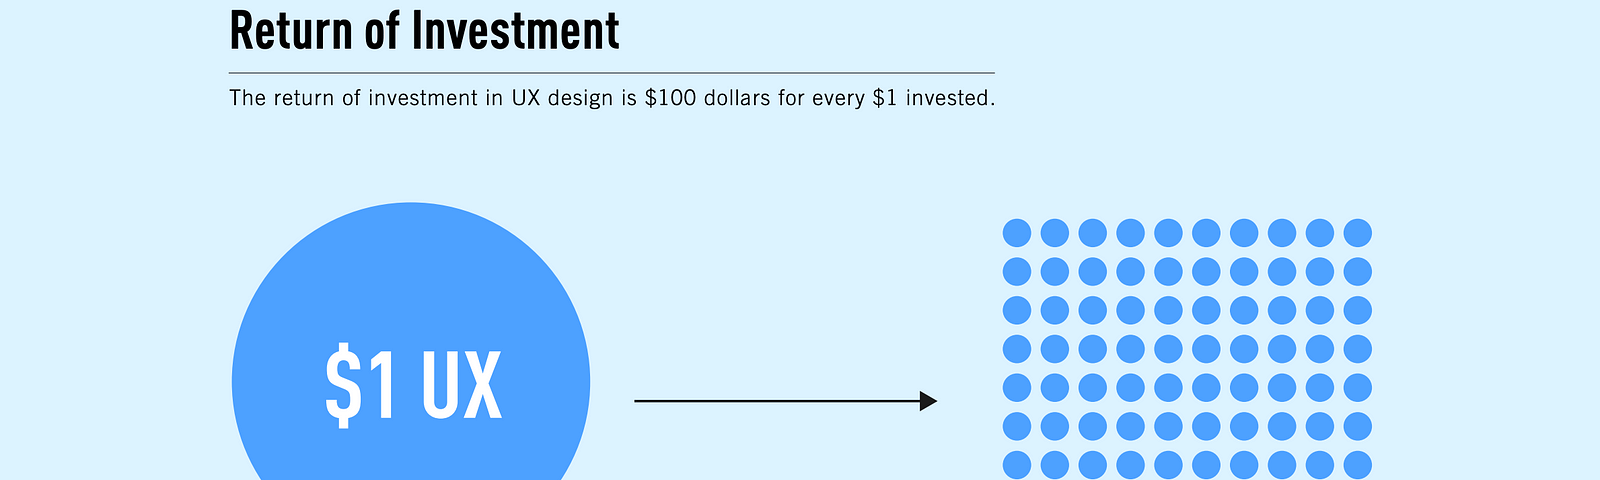 The return of investment in UX design is $100 dollars for every $1 invested.